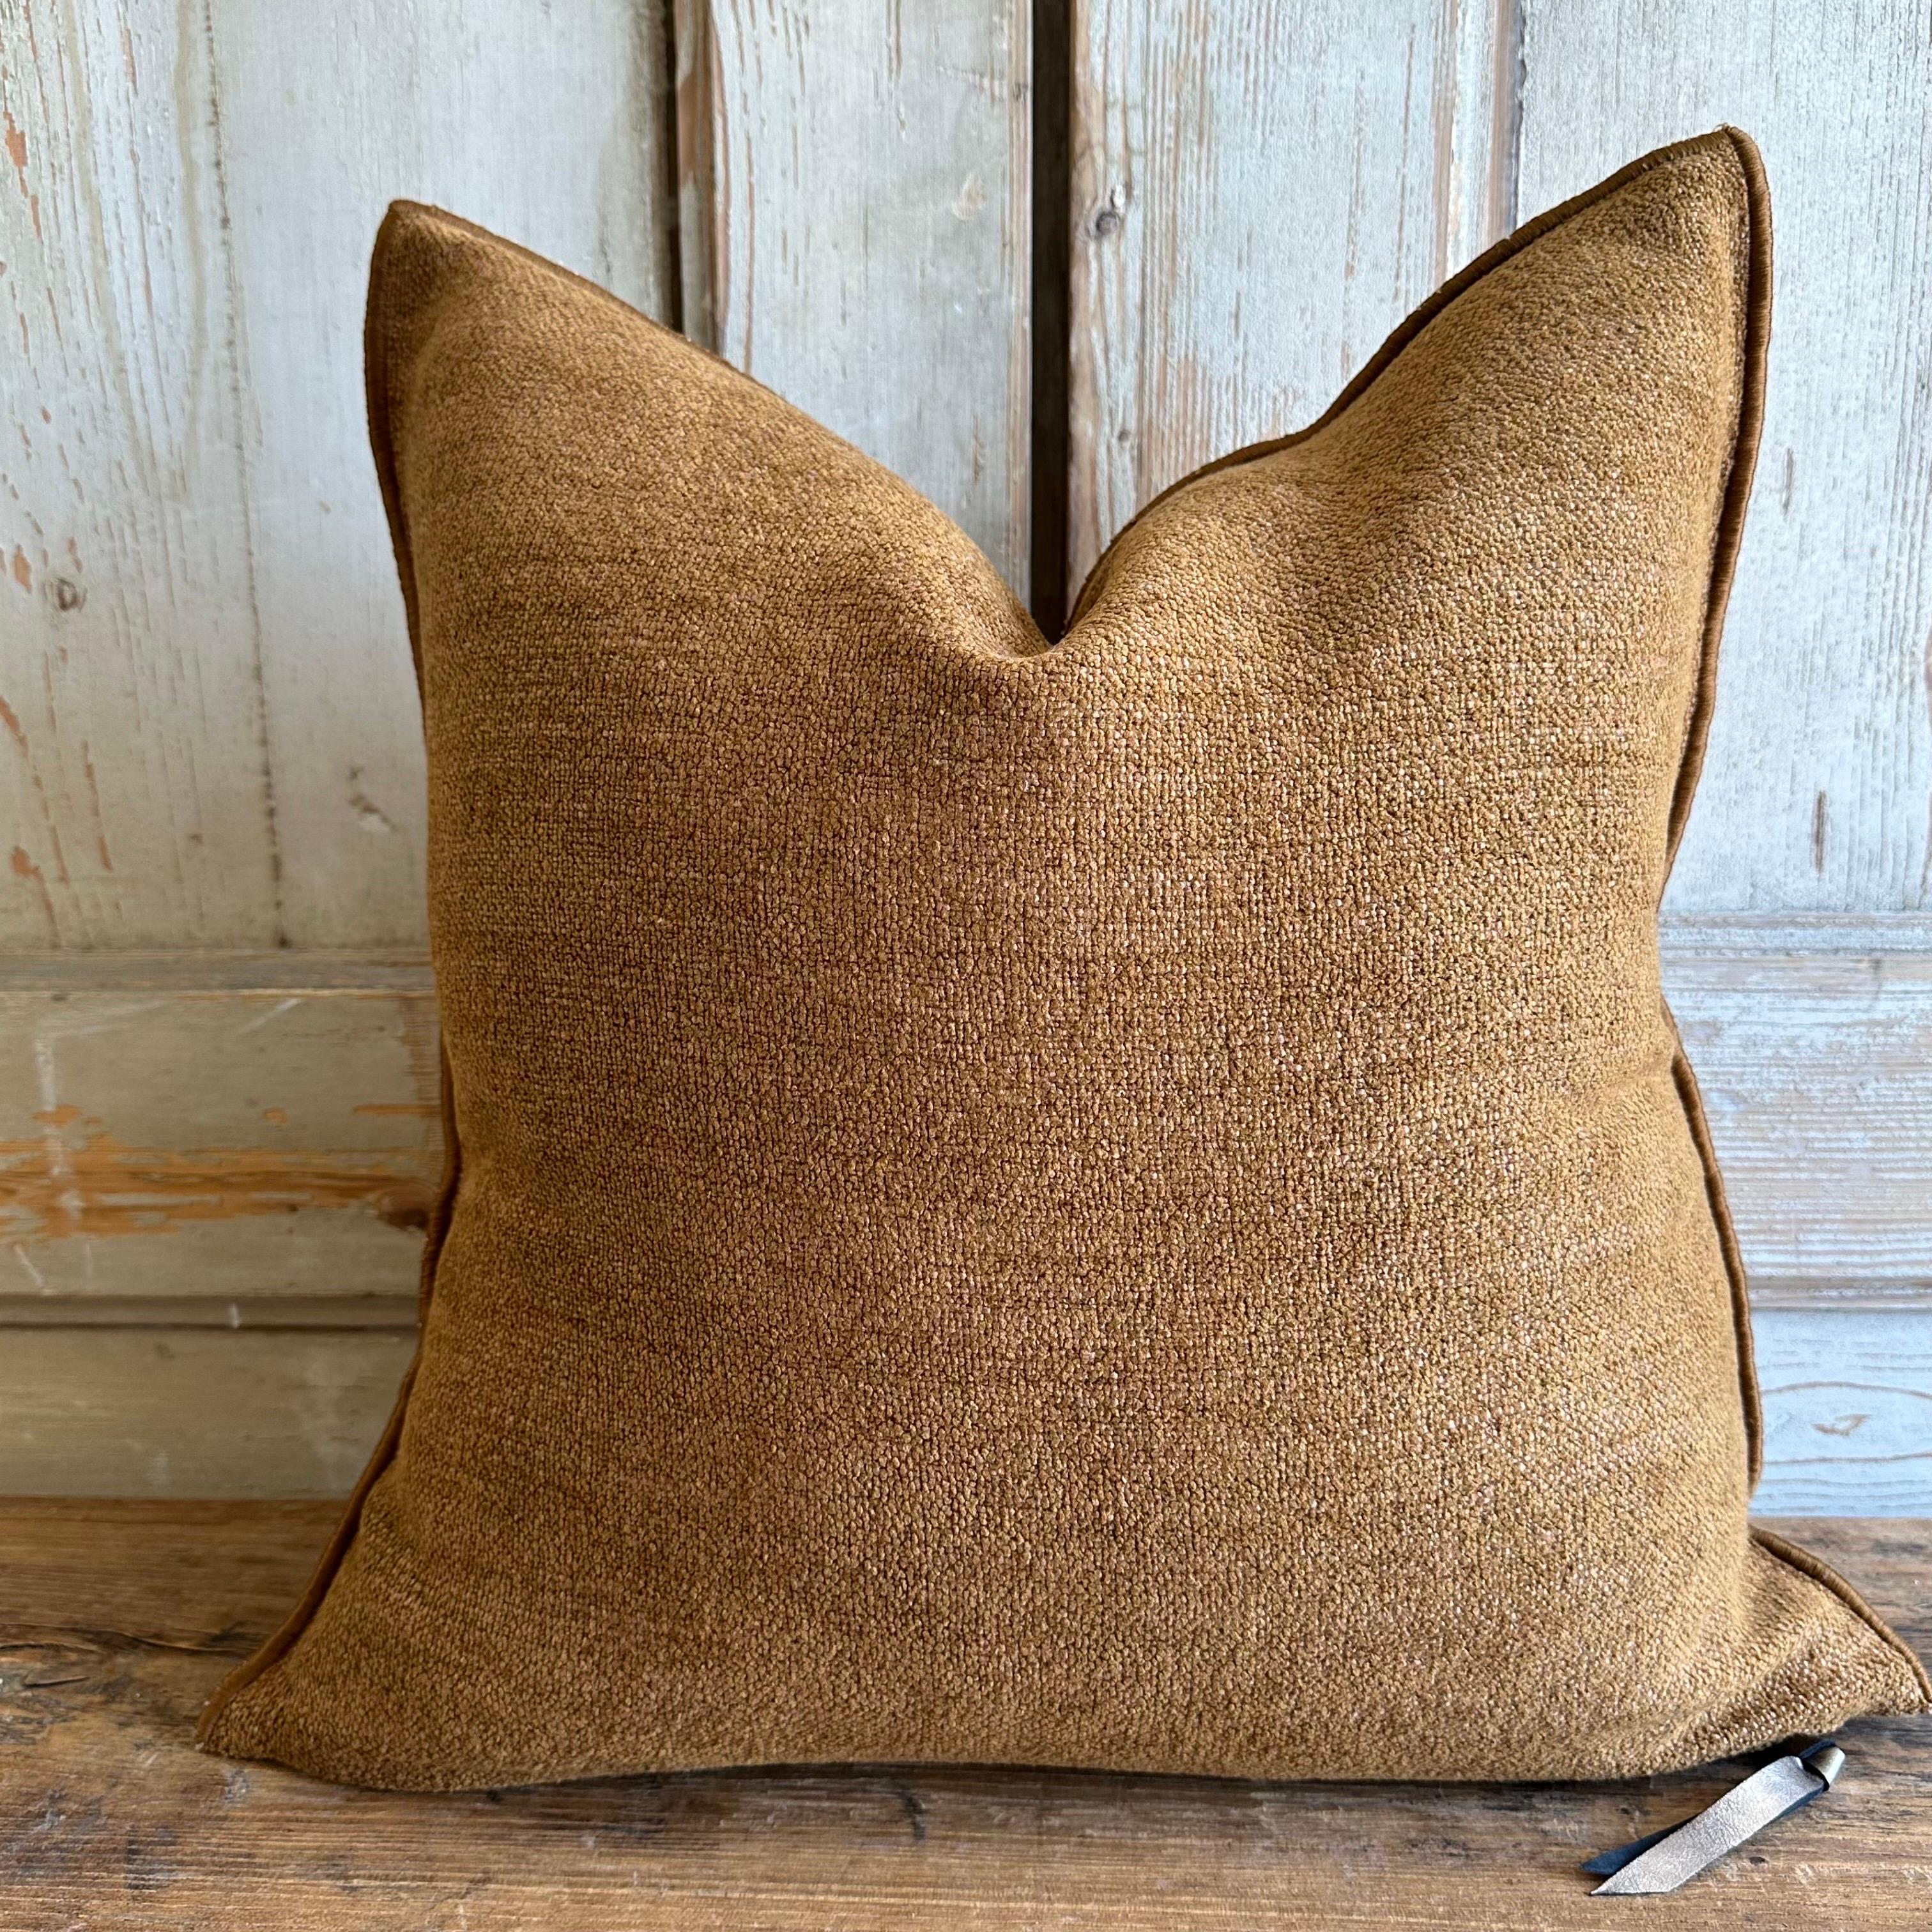 Welcome to bloomhomeinc we stock over 2000 items, please scroll down and click view sellers other items to see more!

Exceptionally soft chenille pillow, made in Paris France.
Color: Havane (a dark rich rust/ terracotta)
Double sided pillow
Size: